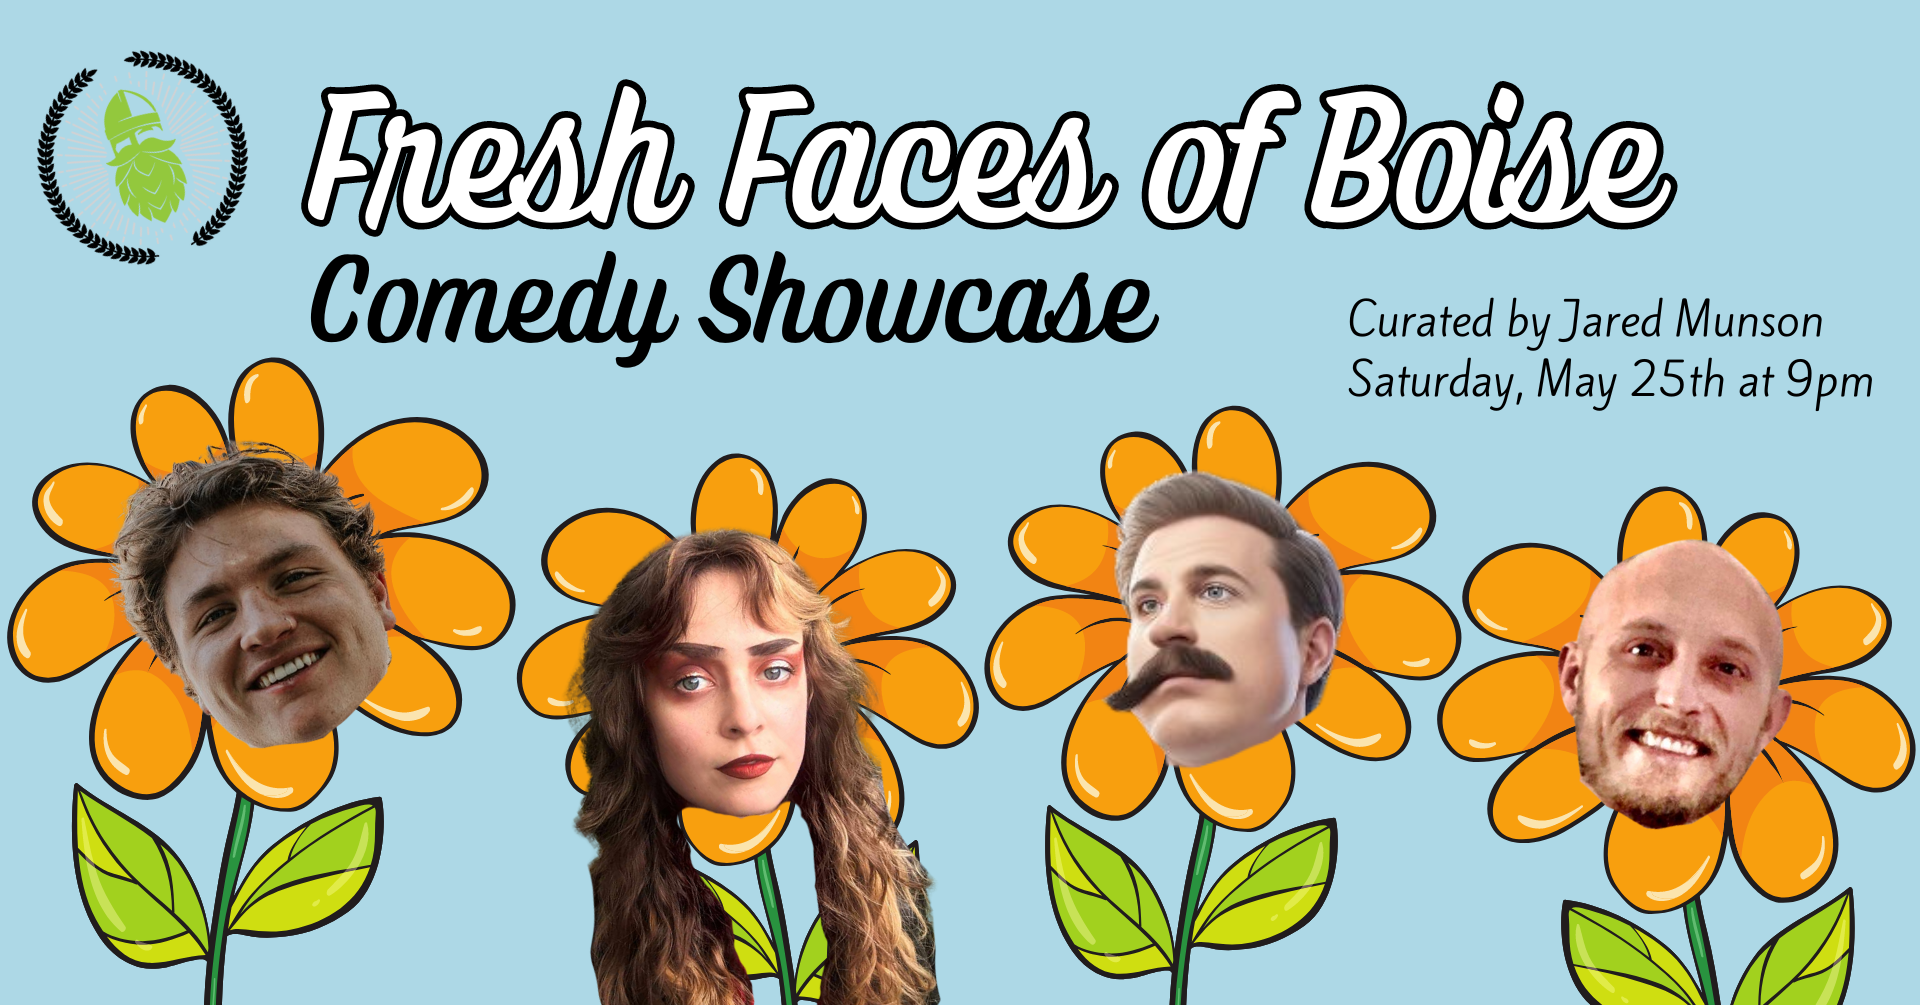 Four cheerful flowers around the faces of four fresh-faced comedians: Samson Large, Kat Falcone, Houston, and Dan Clark. Stand up comedy at Mad Swede Brew Hall.